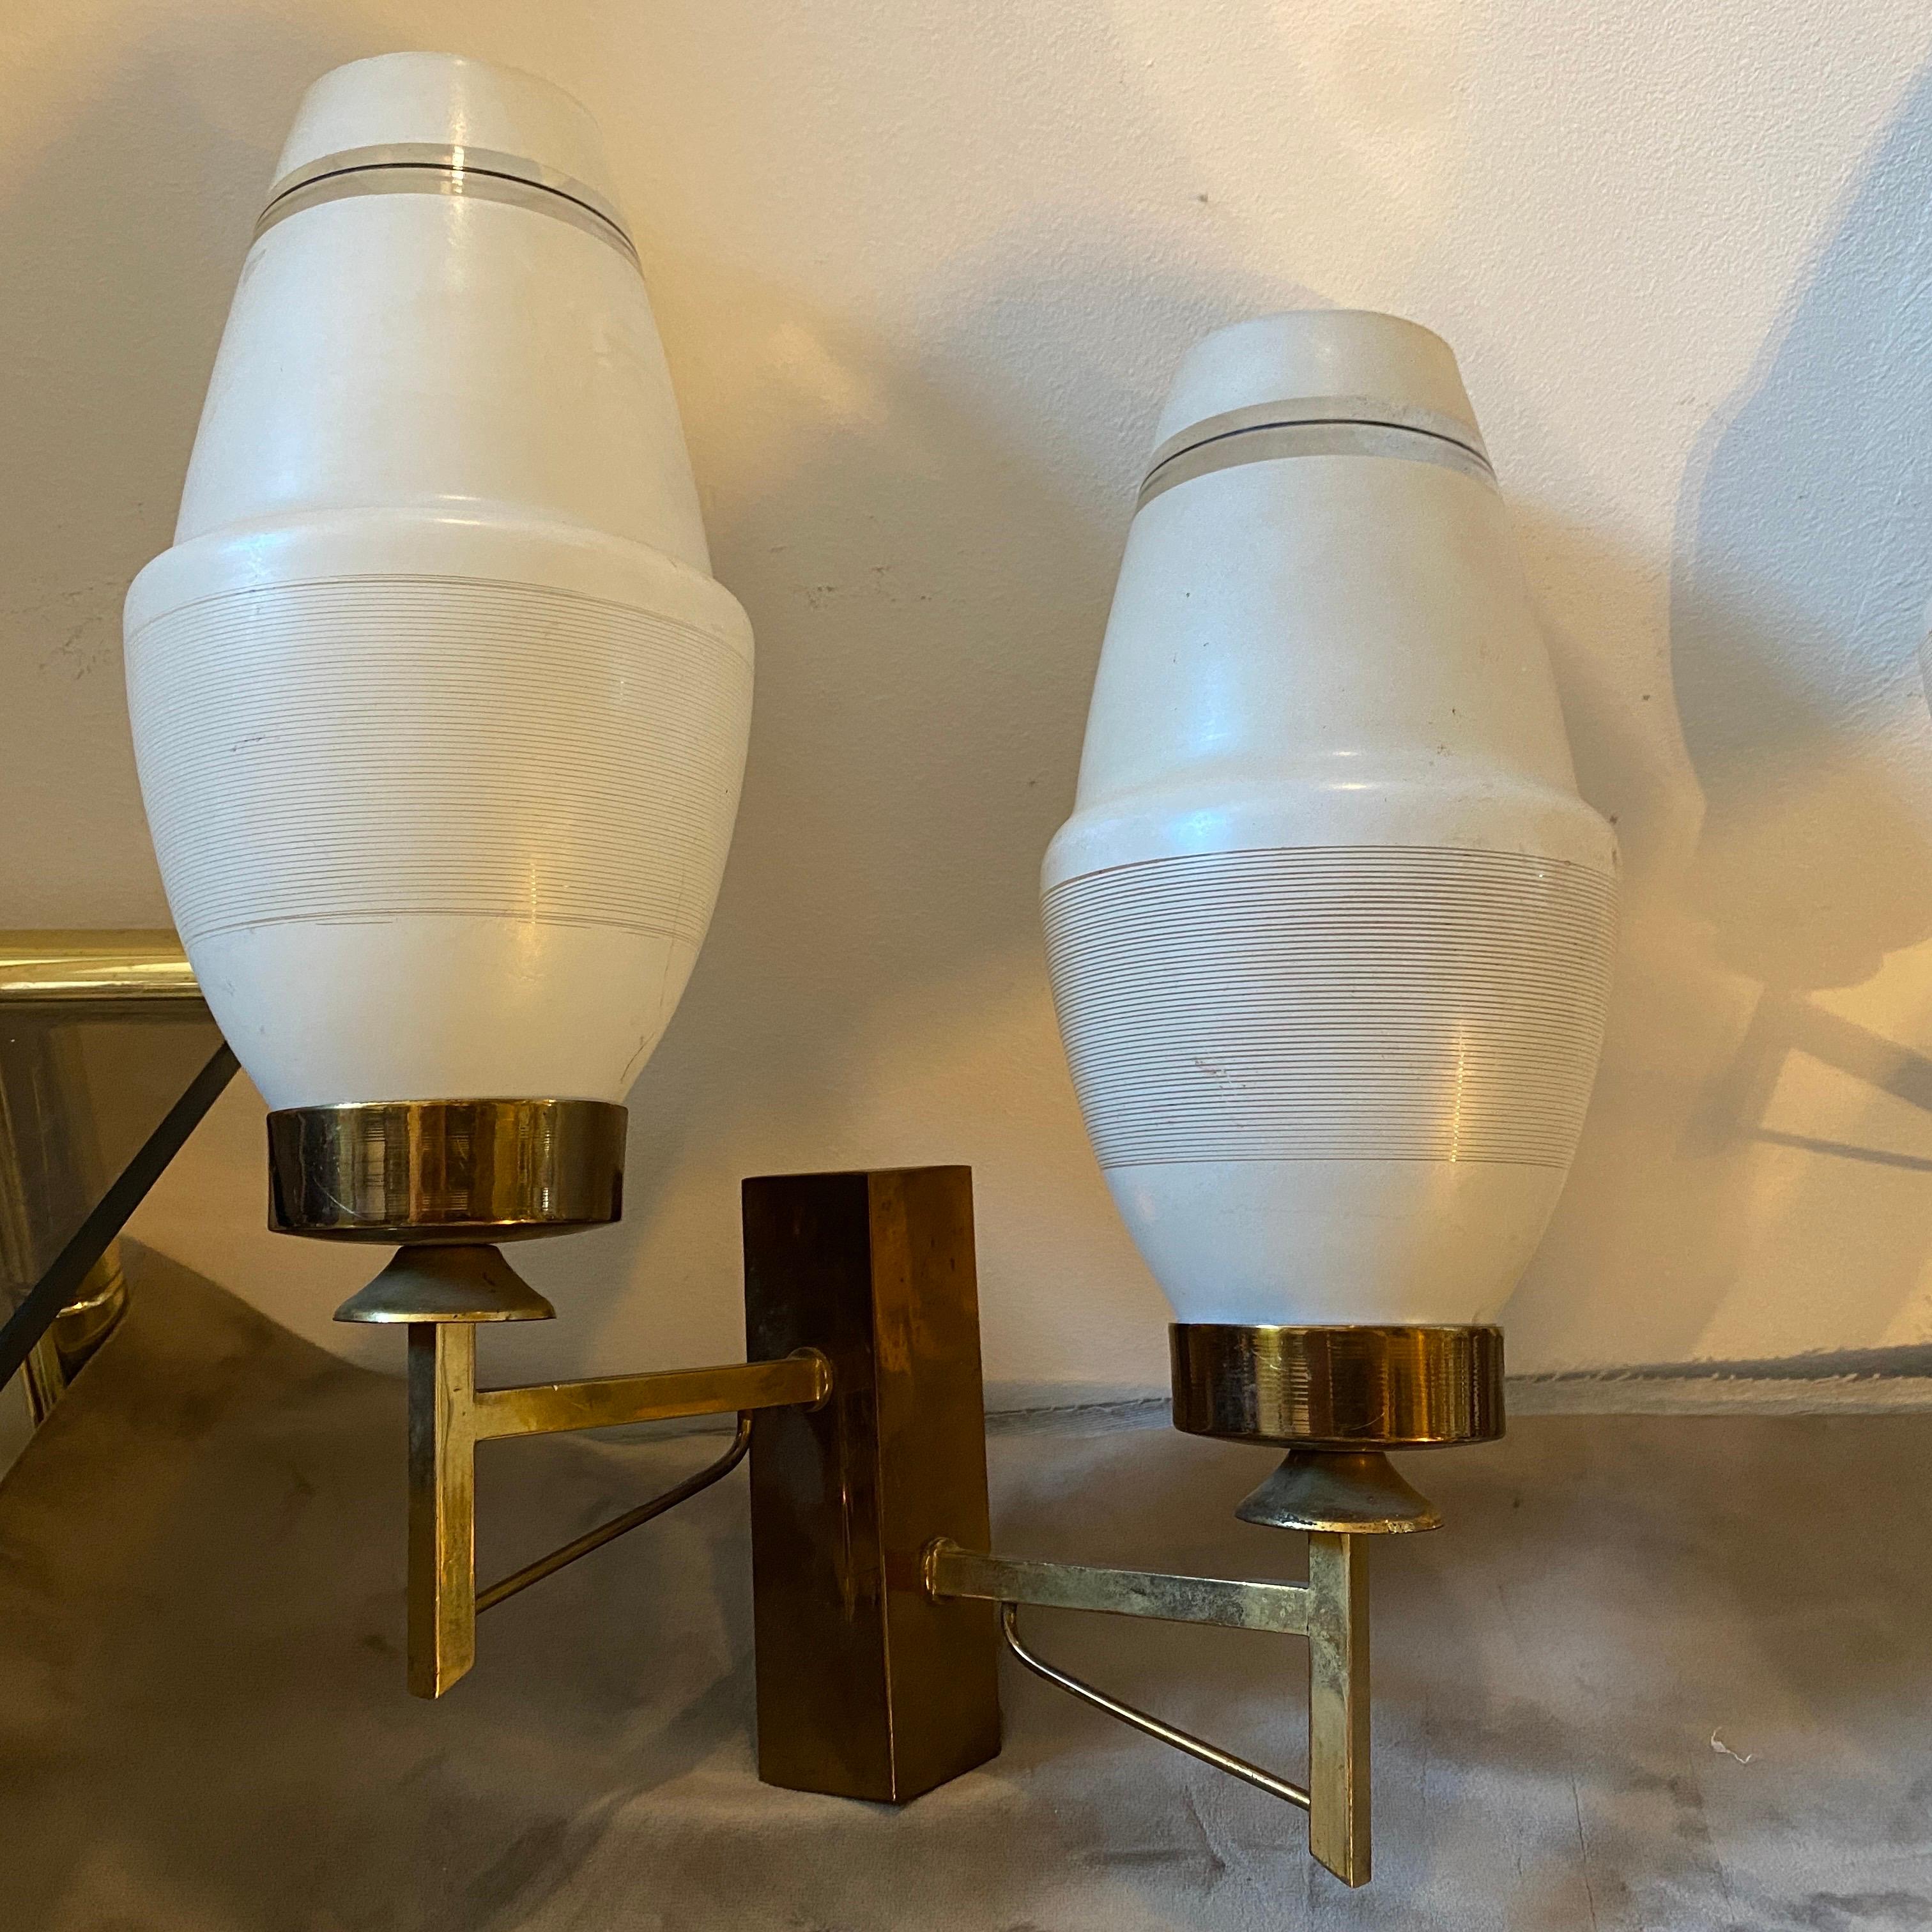 A pair of Mid-Century Modern solid brass and glass wall sconces designed and manufactured in Italy in the 60s in the manner of Arredoluce. They work both 110-240 volts and need regular e14 bulbs. Small defect on brass visible in the photos.